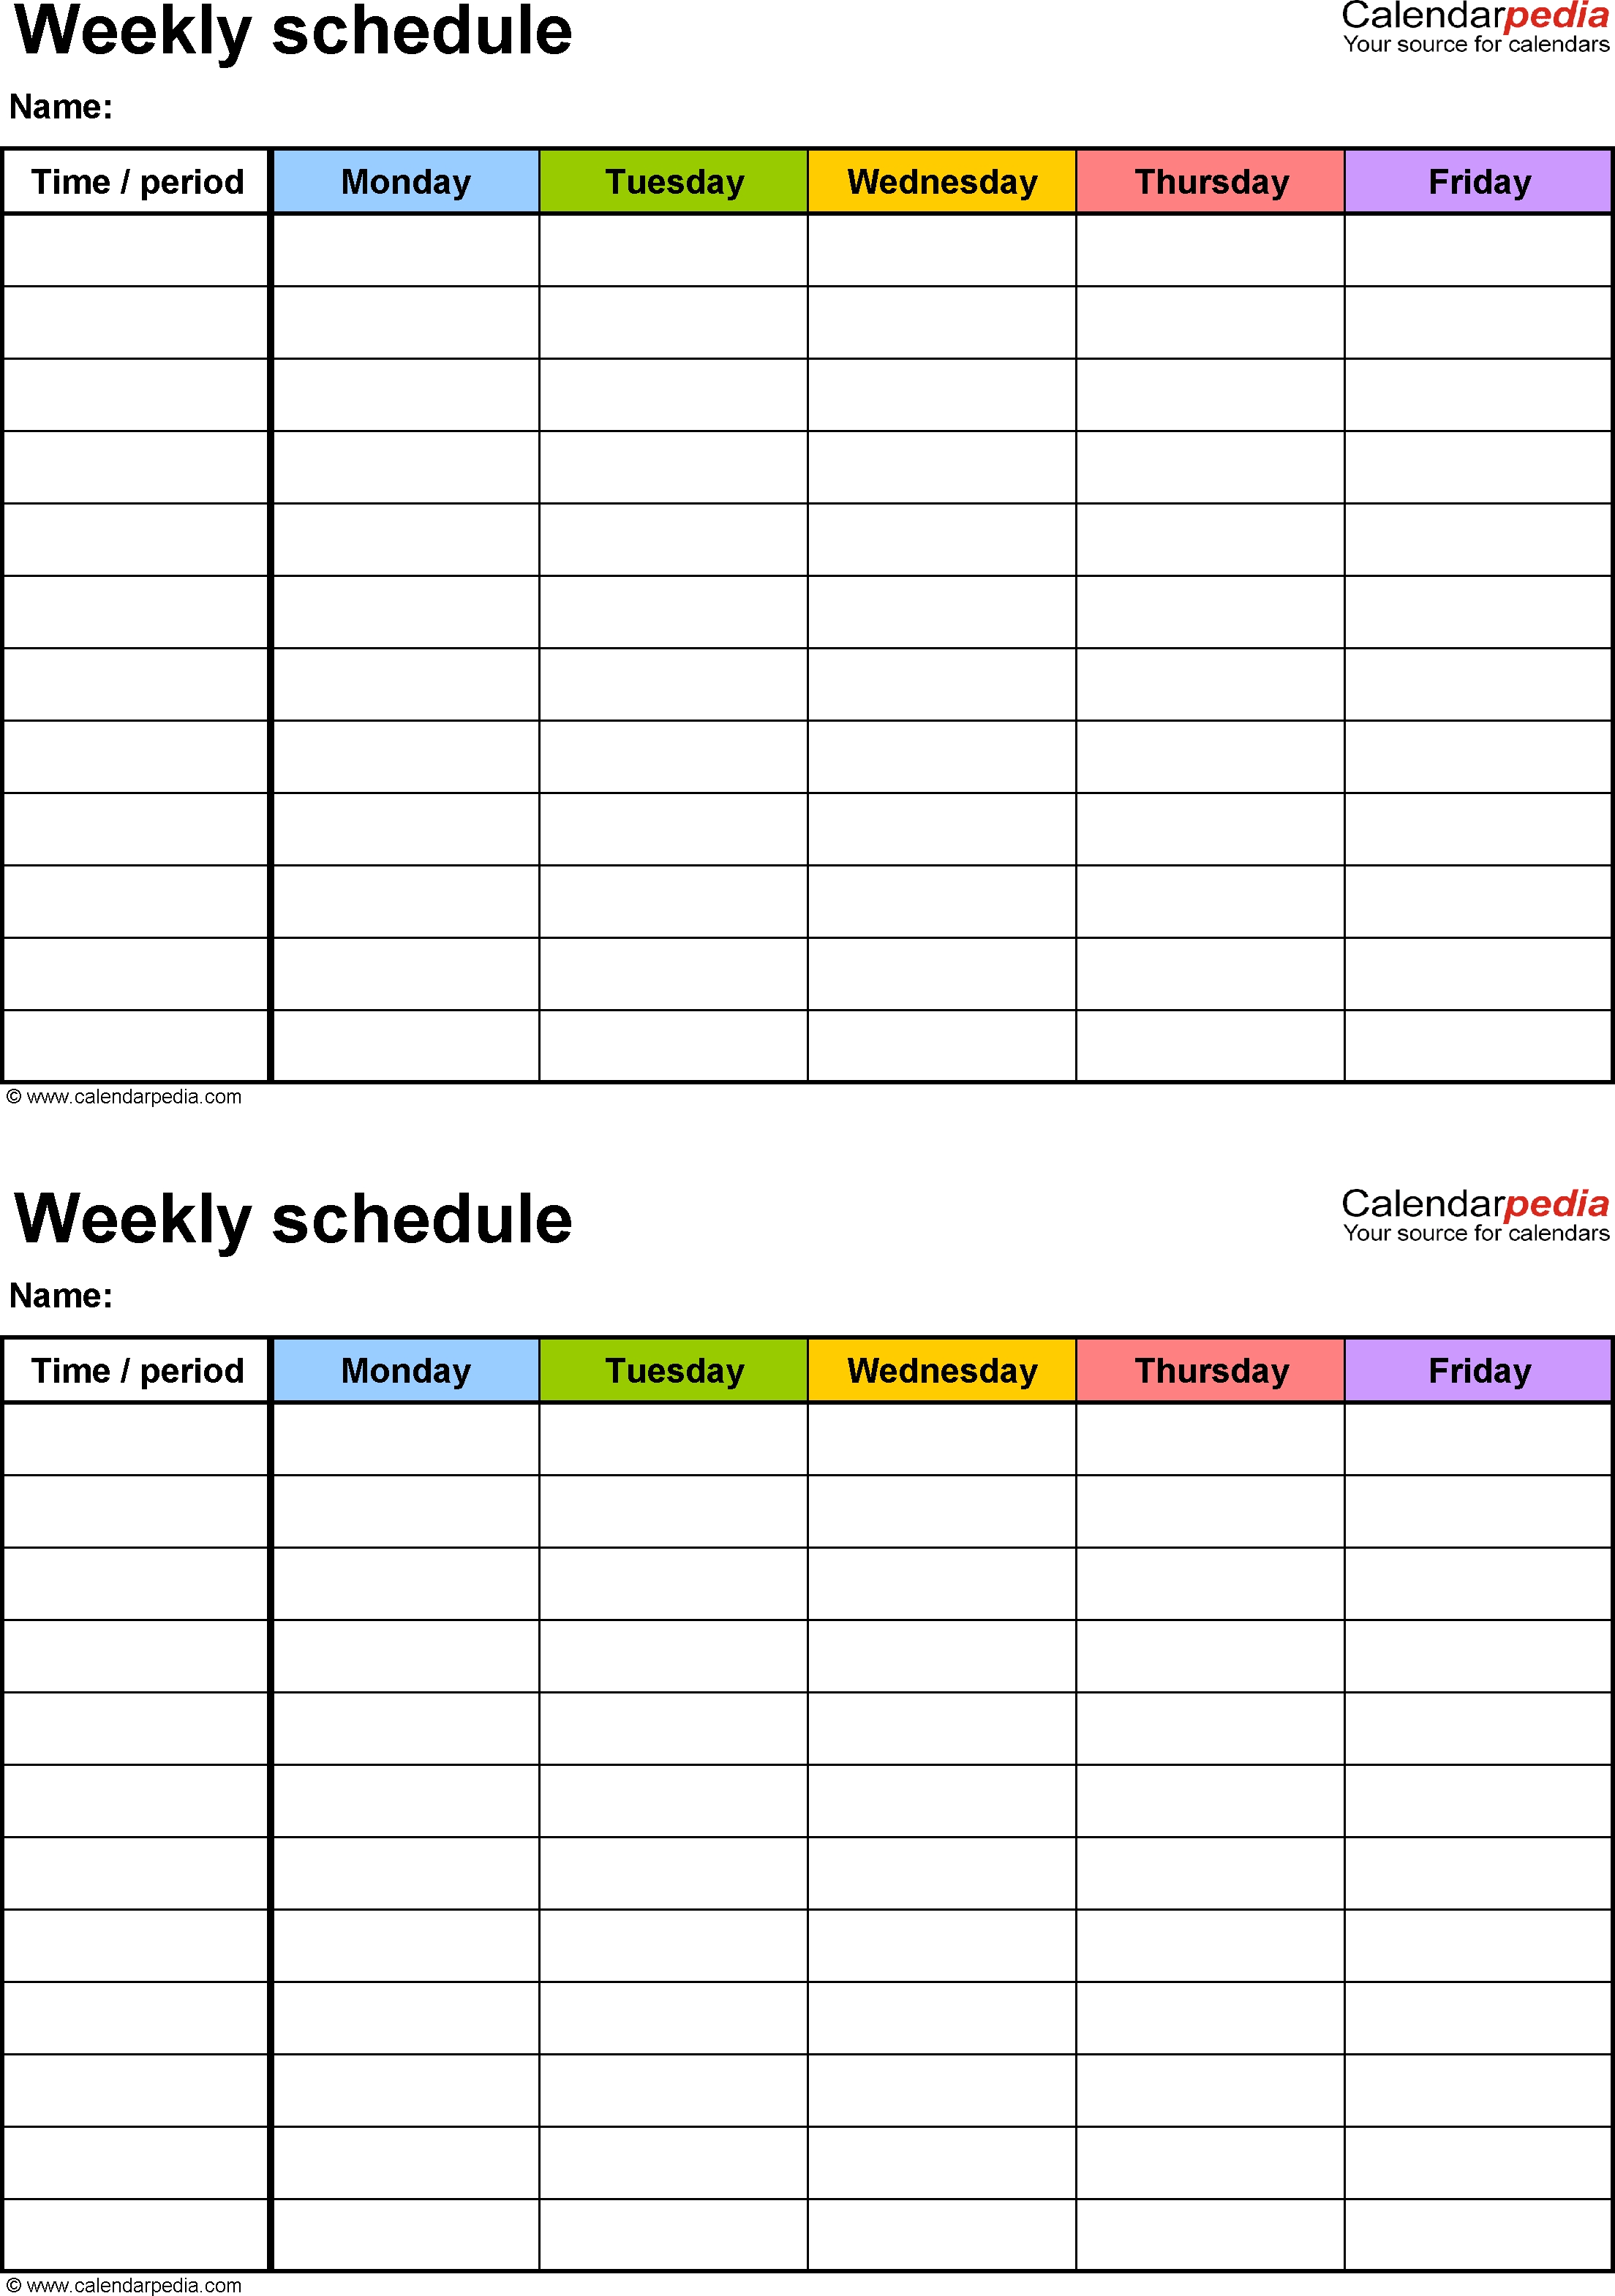 Free Weekly Schedule Templates For Word - 18 Templates Calendar Week Template Word